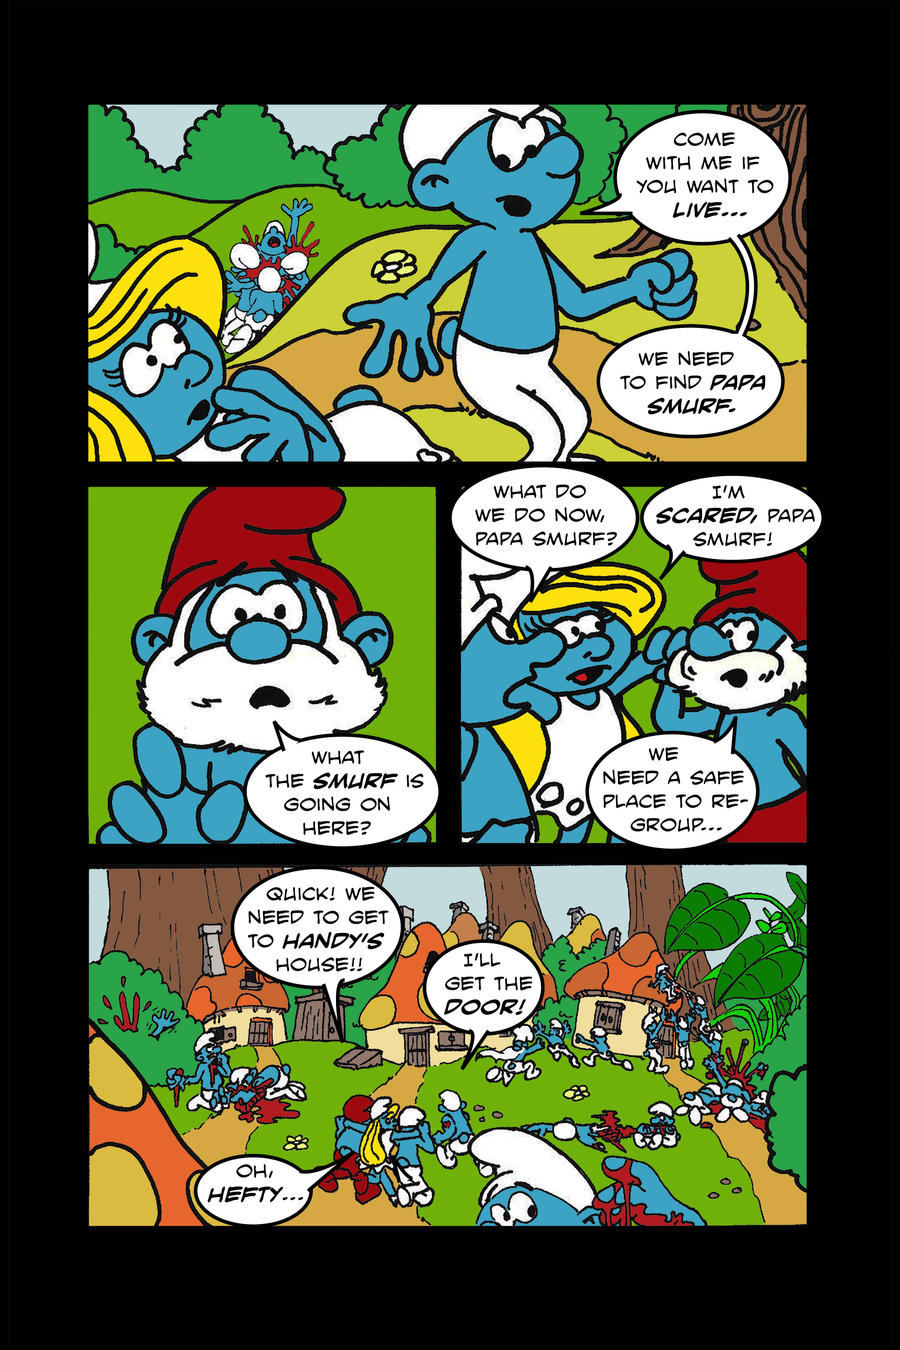 Night of the Smurfing Dead: A Parody - NotSD page 022 words